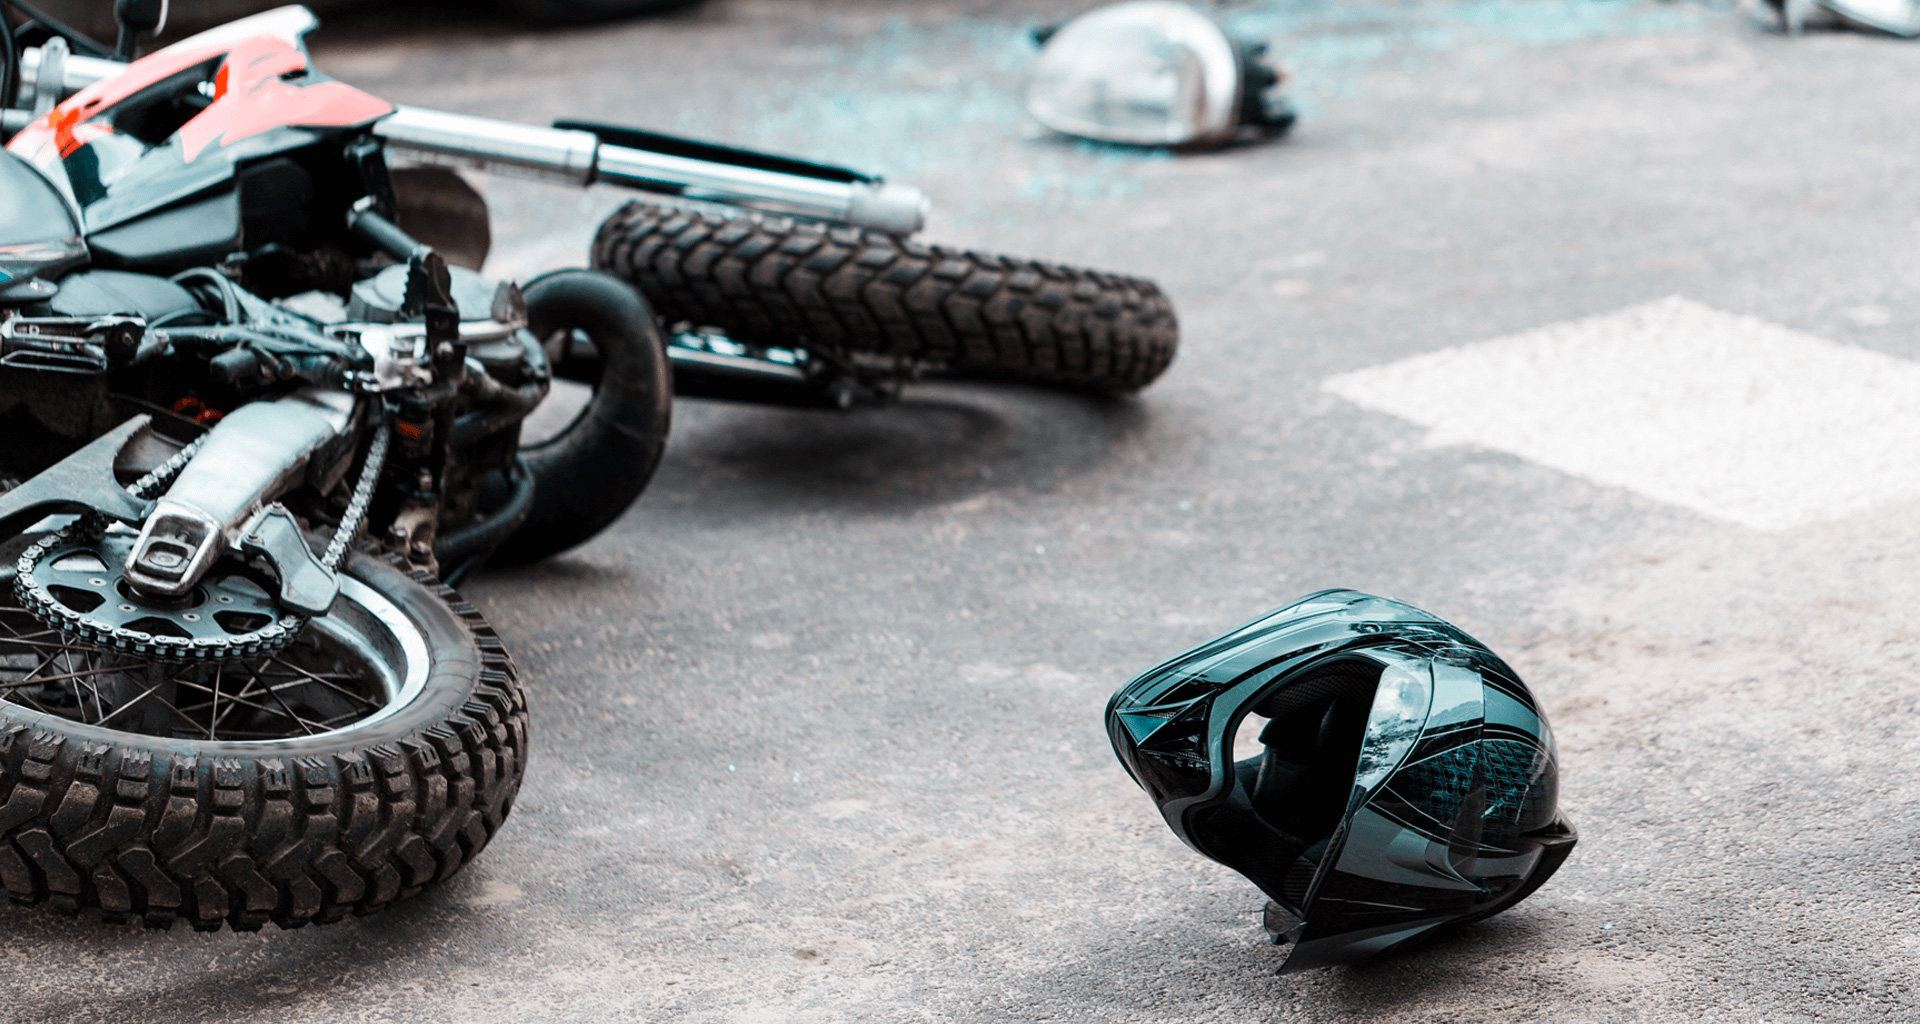 motocross motorcycle and a helmet lies on the road after an accident